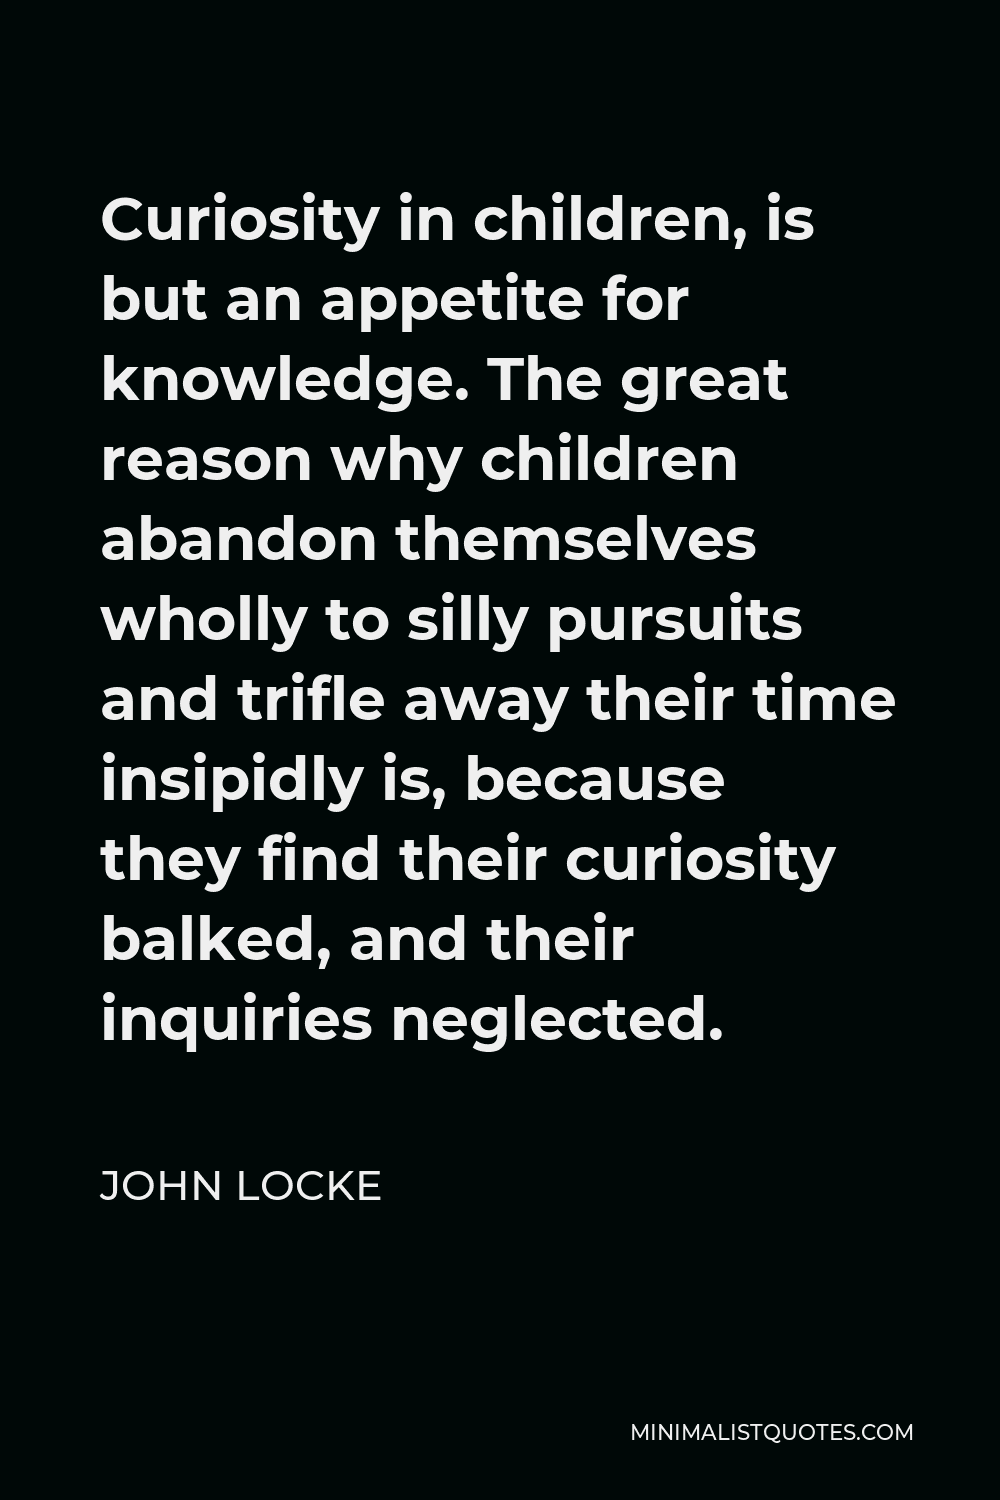 John Locke Quote - Curiosity in children, is but an appetite for knowledge. The great reason why children abandon themselves wholly to silly pursuits and trifle away their time insipidly is, because they find their curiosity balked, and their inquiries neglected.